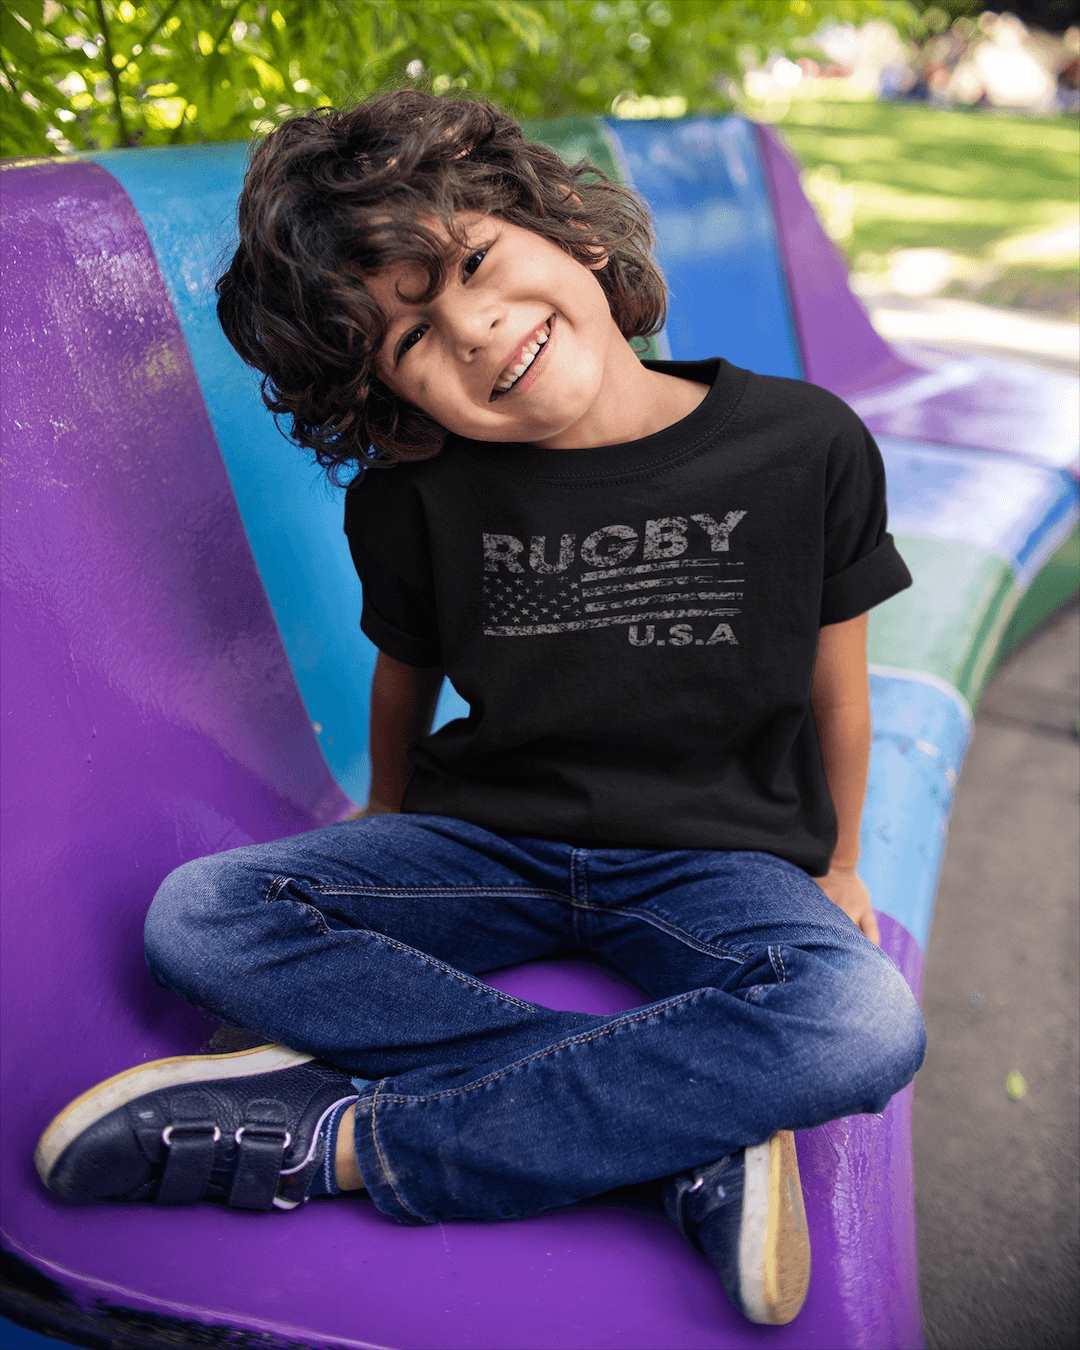 RUGBYNOMAD black organic cotton kids classic streetwear t shirt with south africa springbok artistic design, boy model, sitting on purple blue bench, smiling, black jeans, tennis shoes Edit